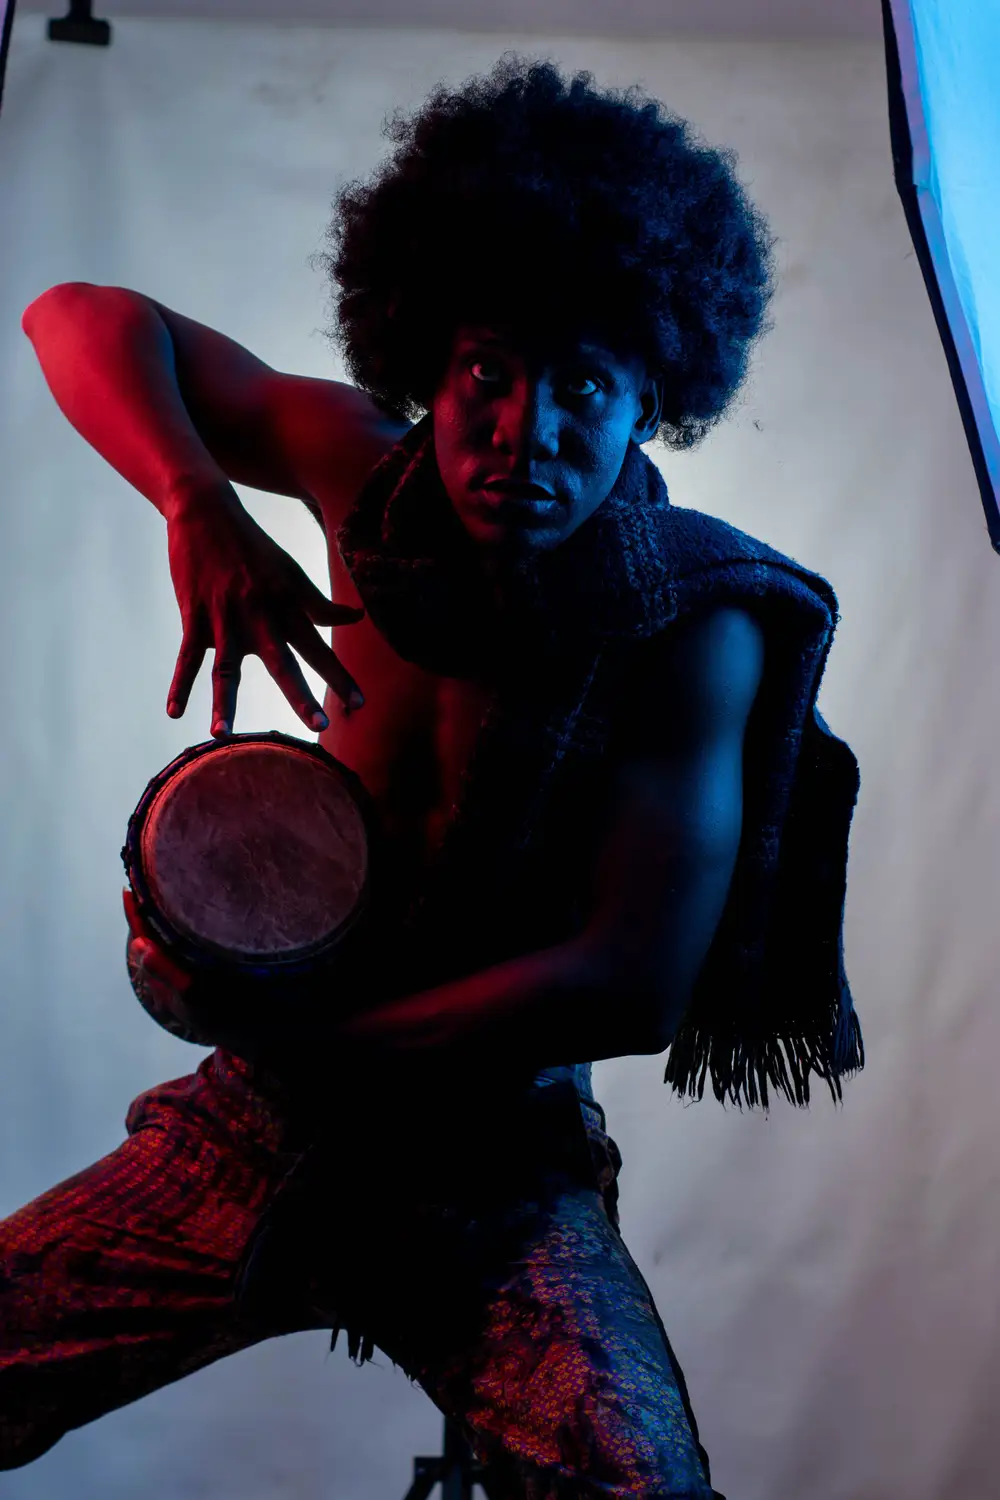 model on afro hairstyle plays drum 3